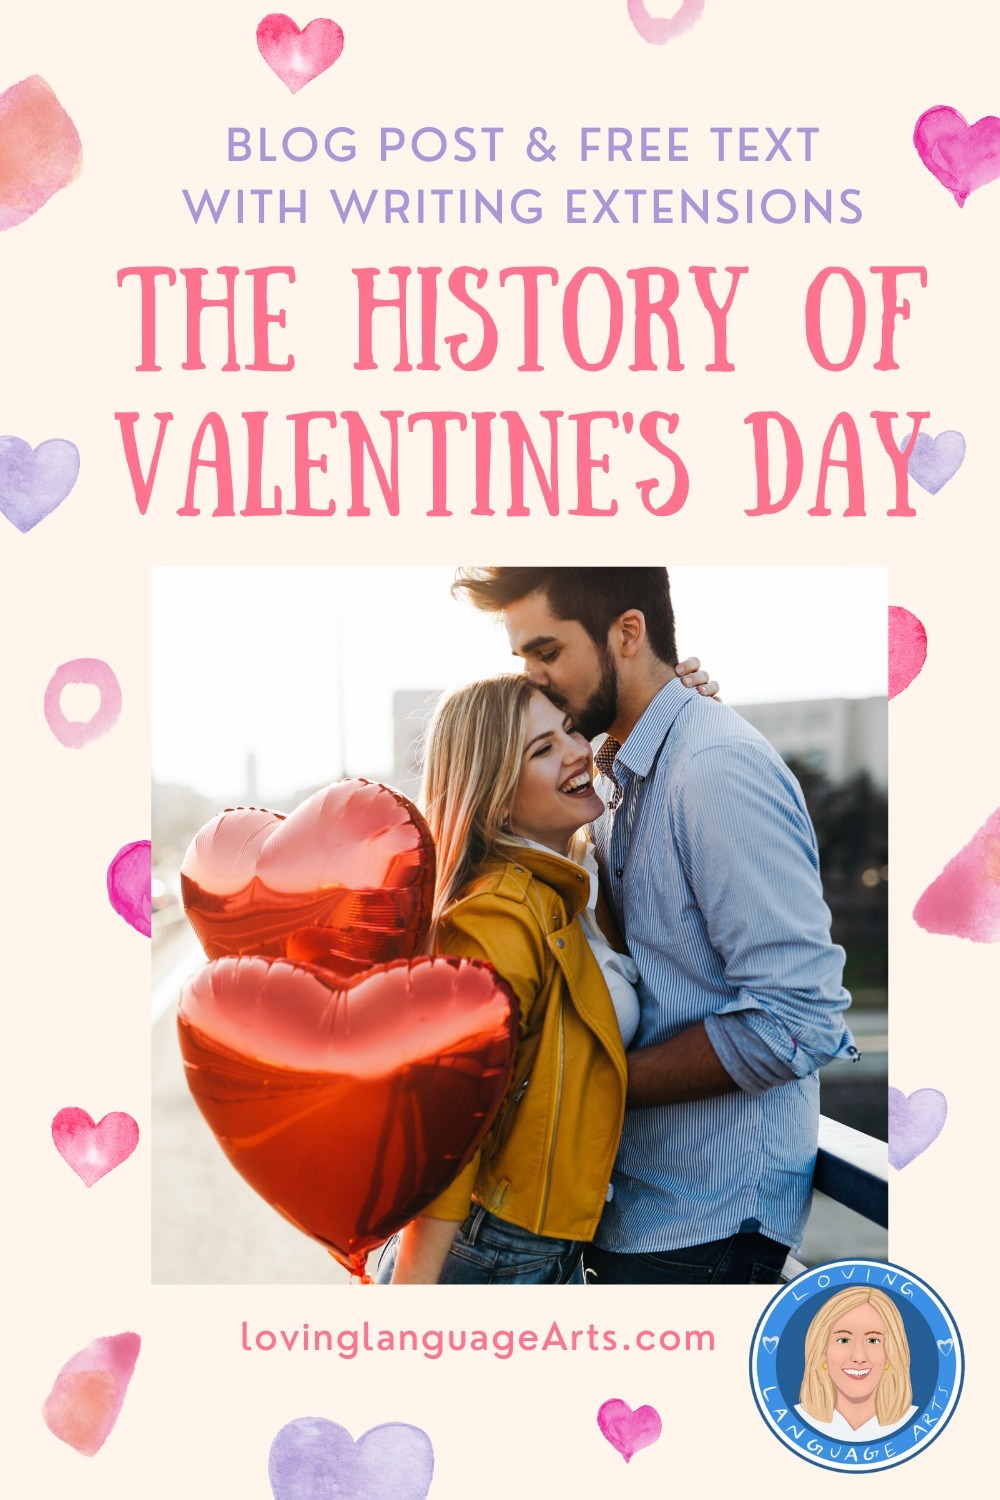 Blog post and free text the history of valentine's day interesting facts